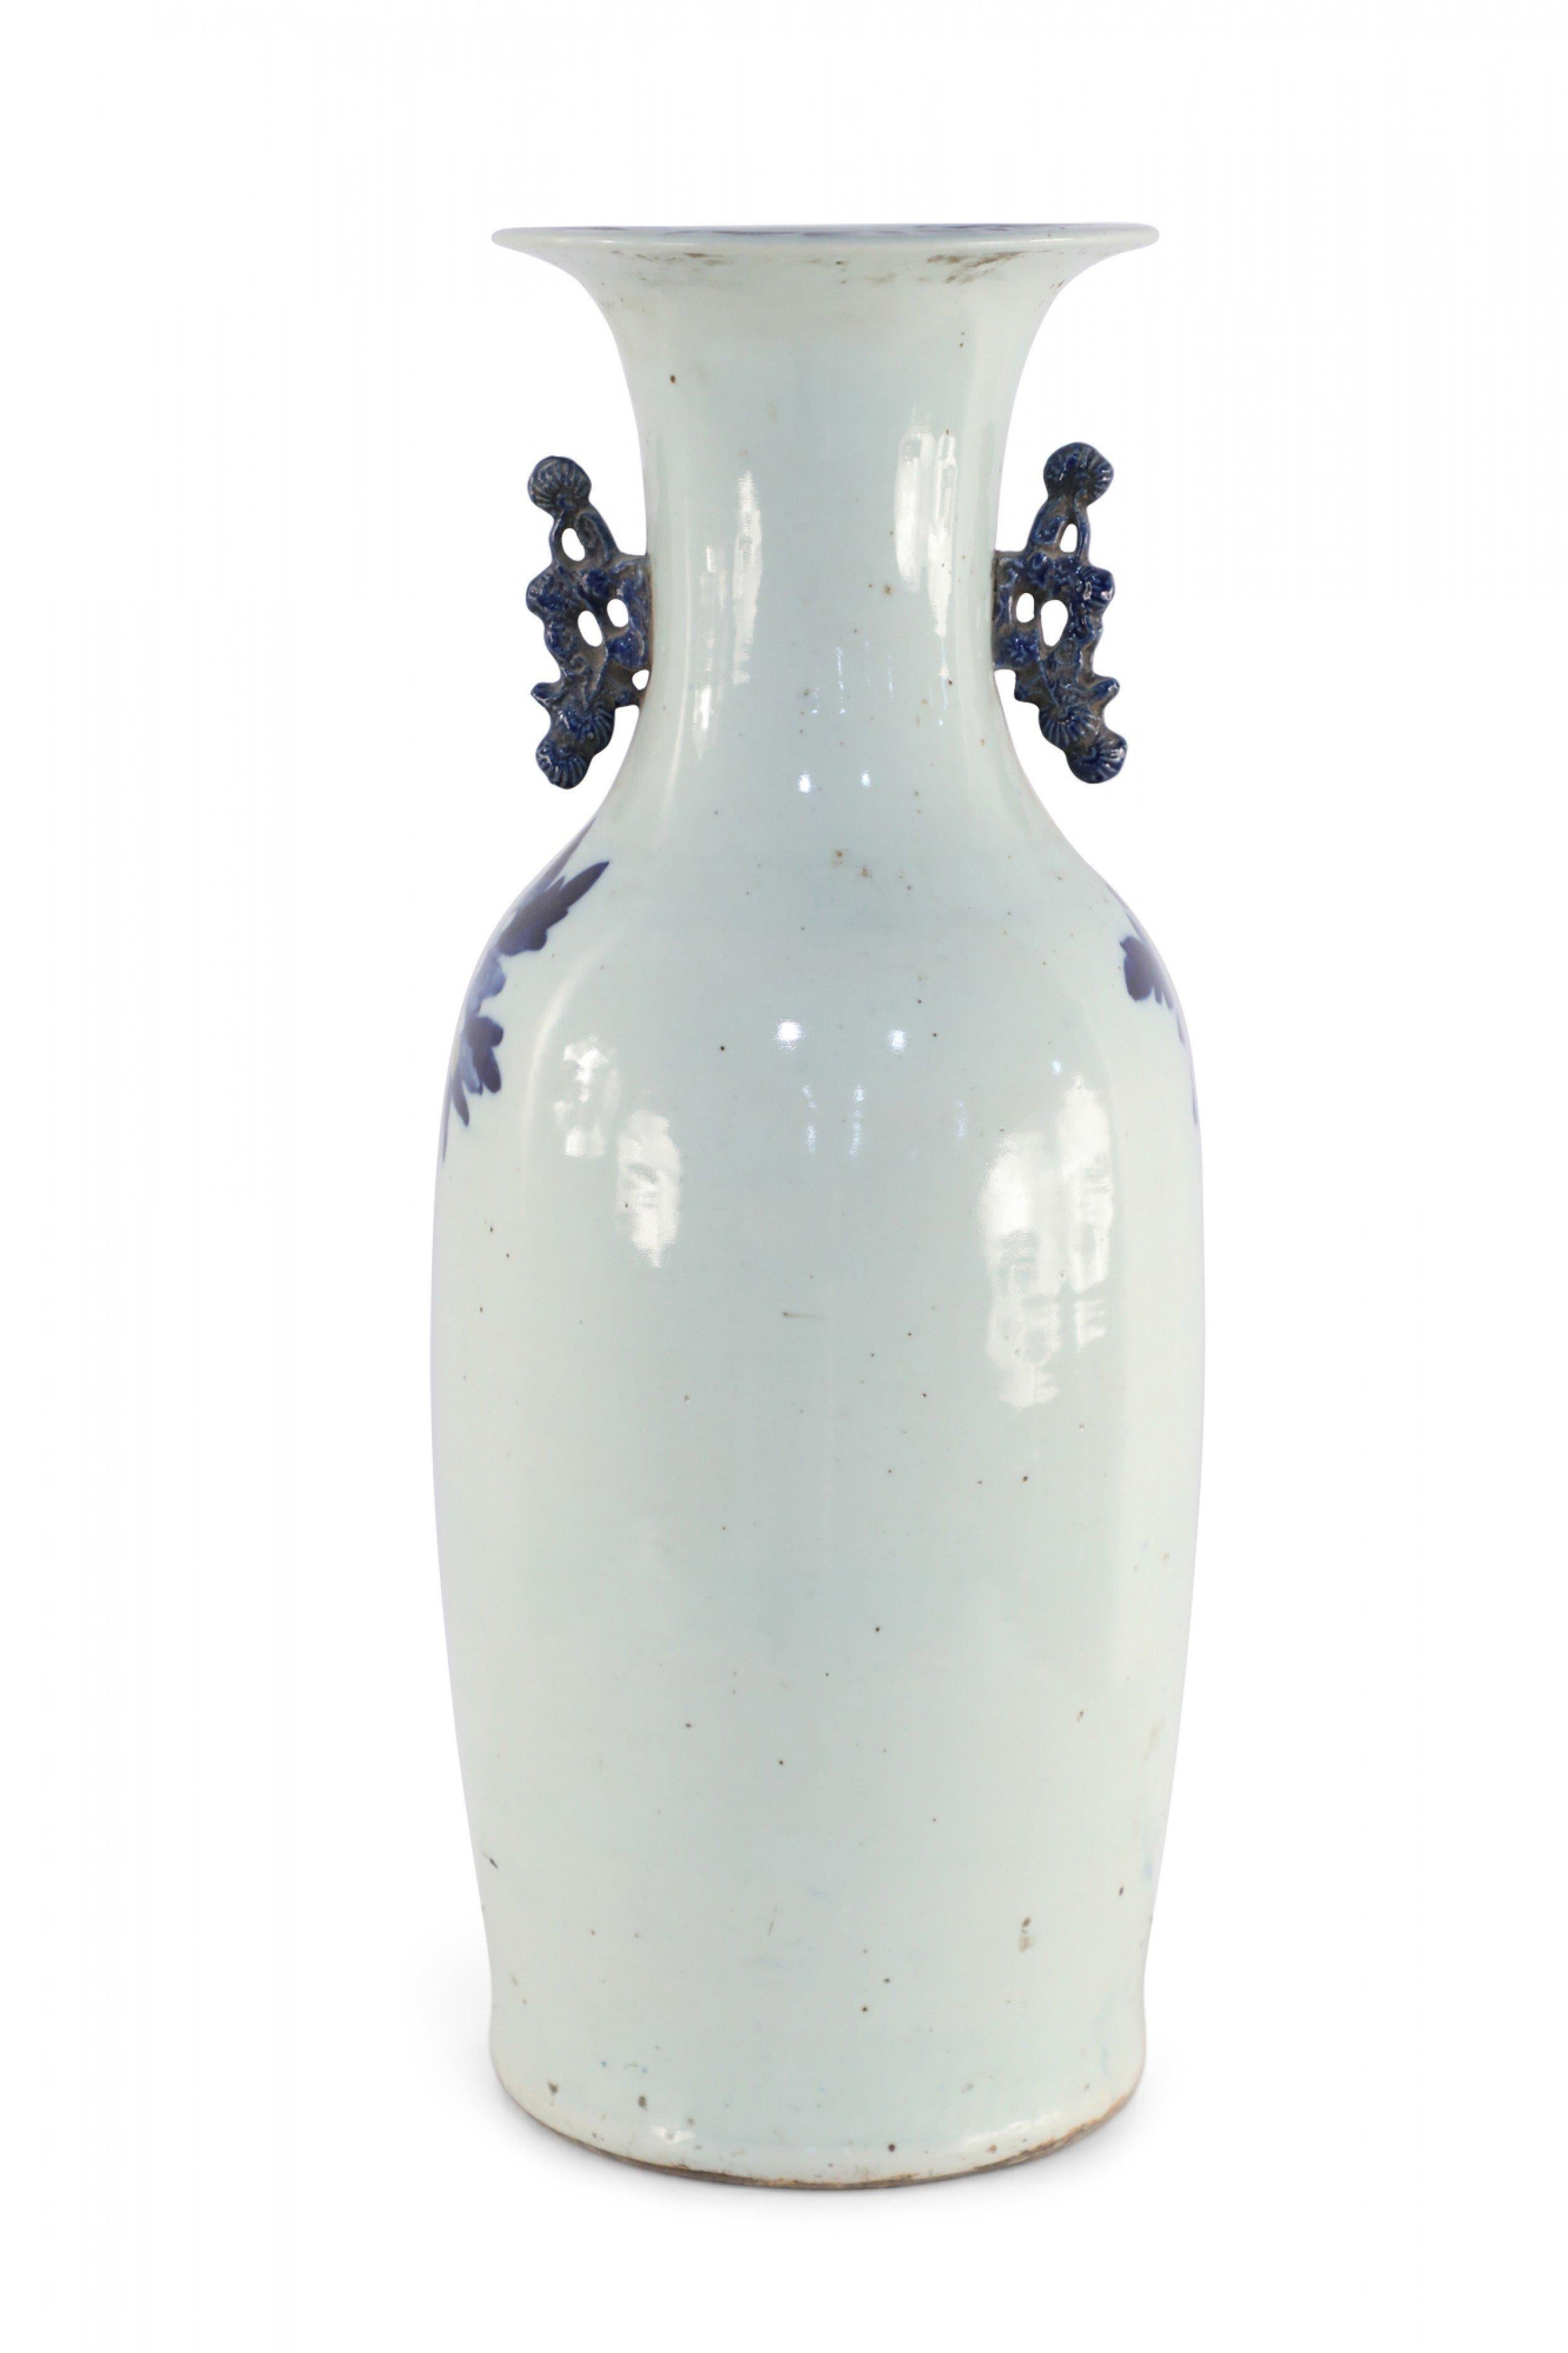 Antique Chinese (late 19th century) large porcelain urn with blue spotted deer amid florals on an off-white background and two navy scrolled handles along the neck.
      